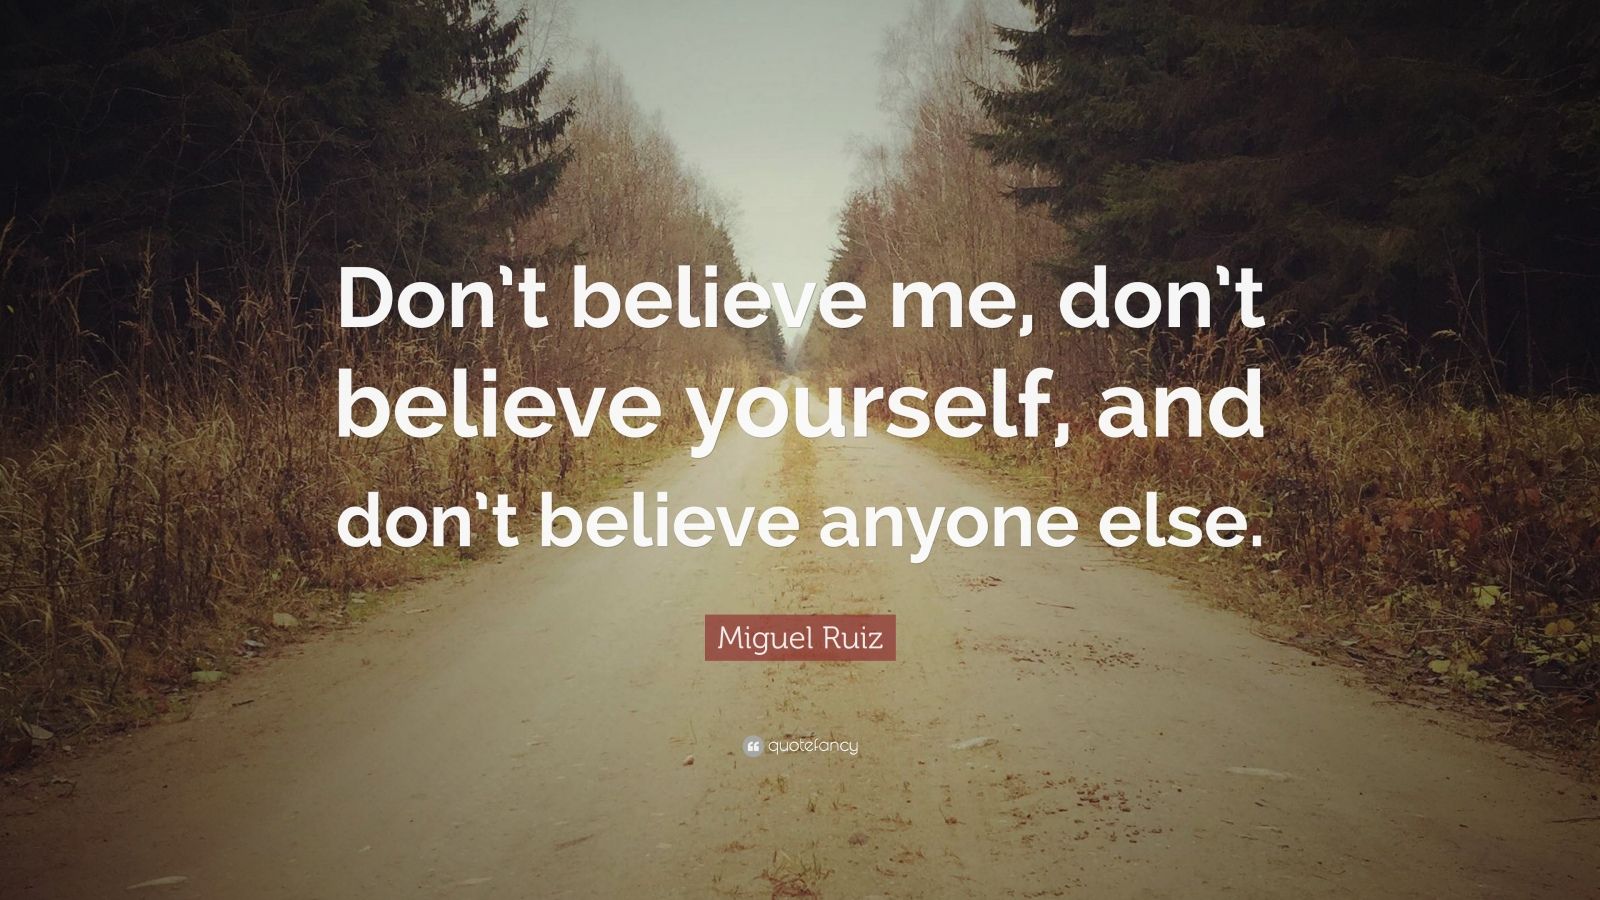 Miguel Ruiz Quote: “Don't believe me, don't believe yourself, and ...